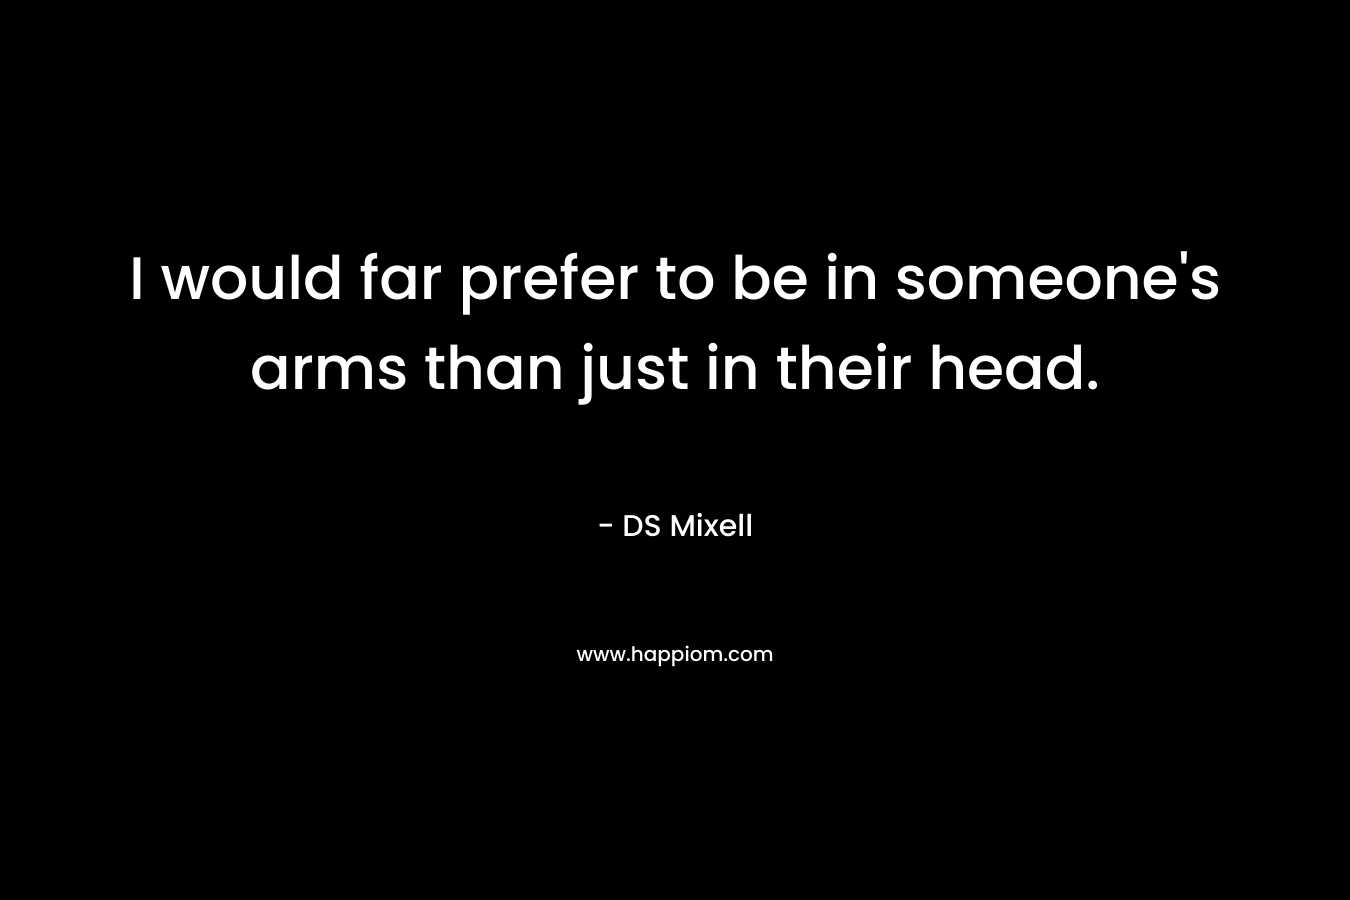 I would far prefer to be in someone’s arms than just in their head. – DS Mixell